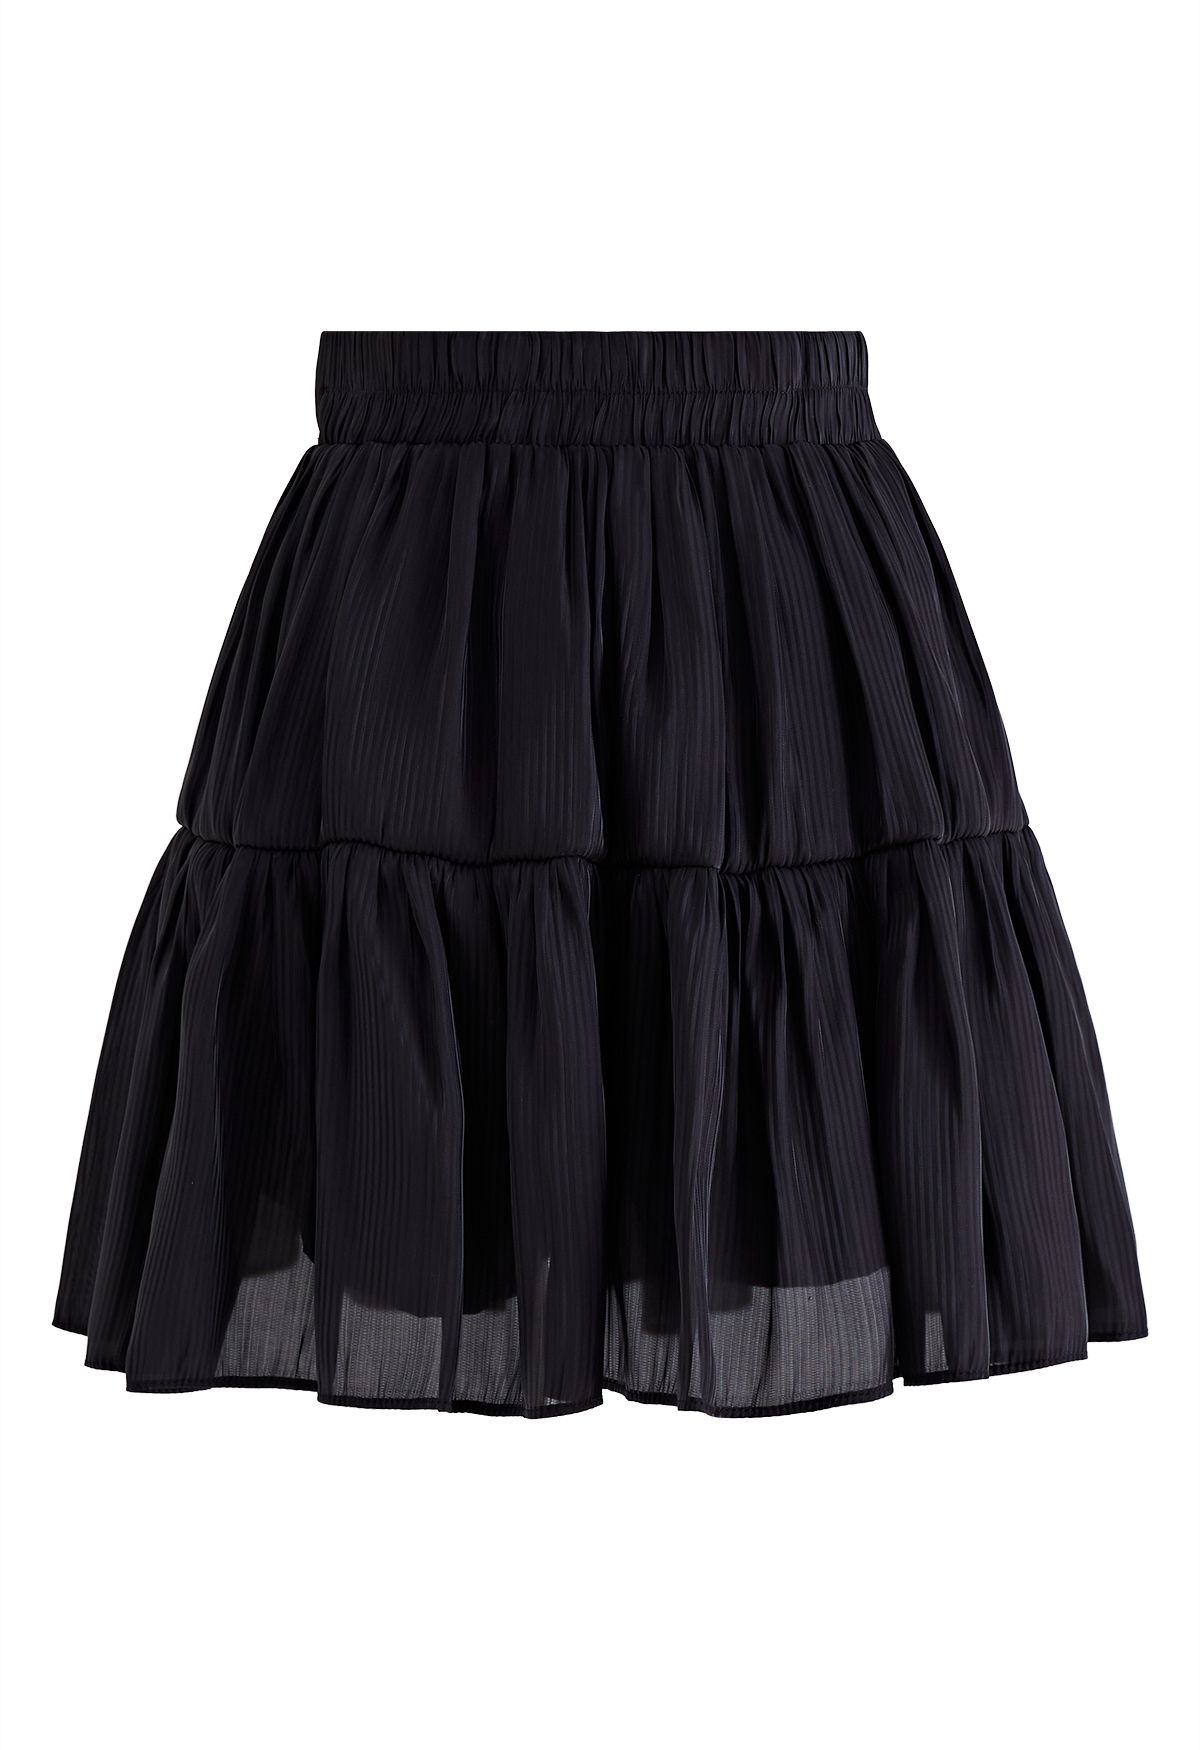 Glimmer Ruched Flare Mini Skirt in Black